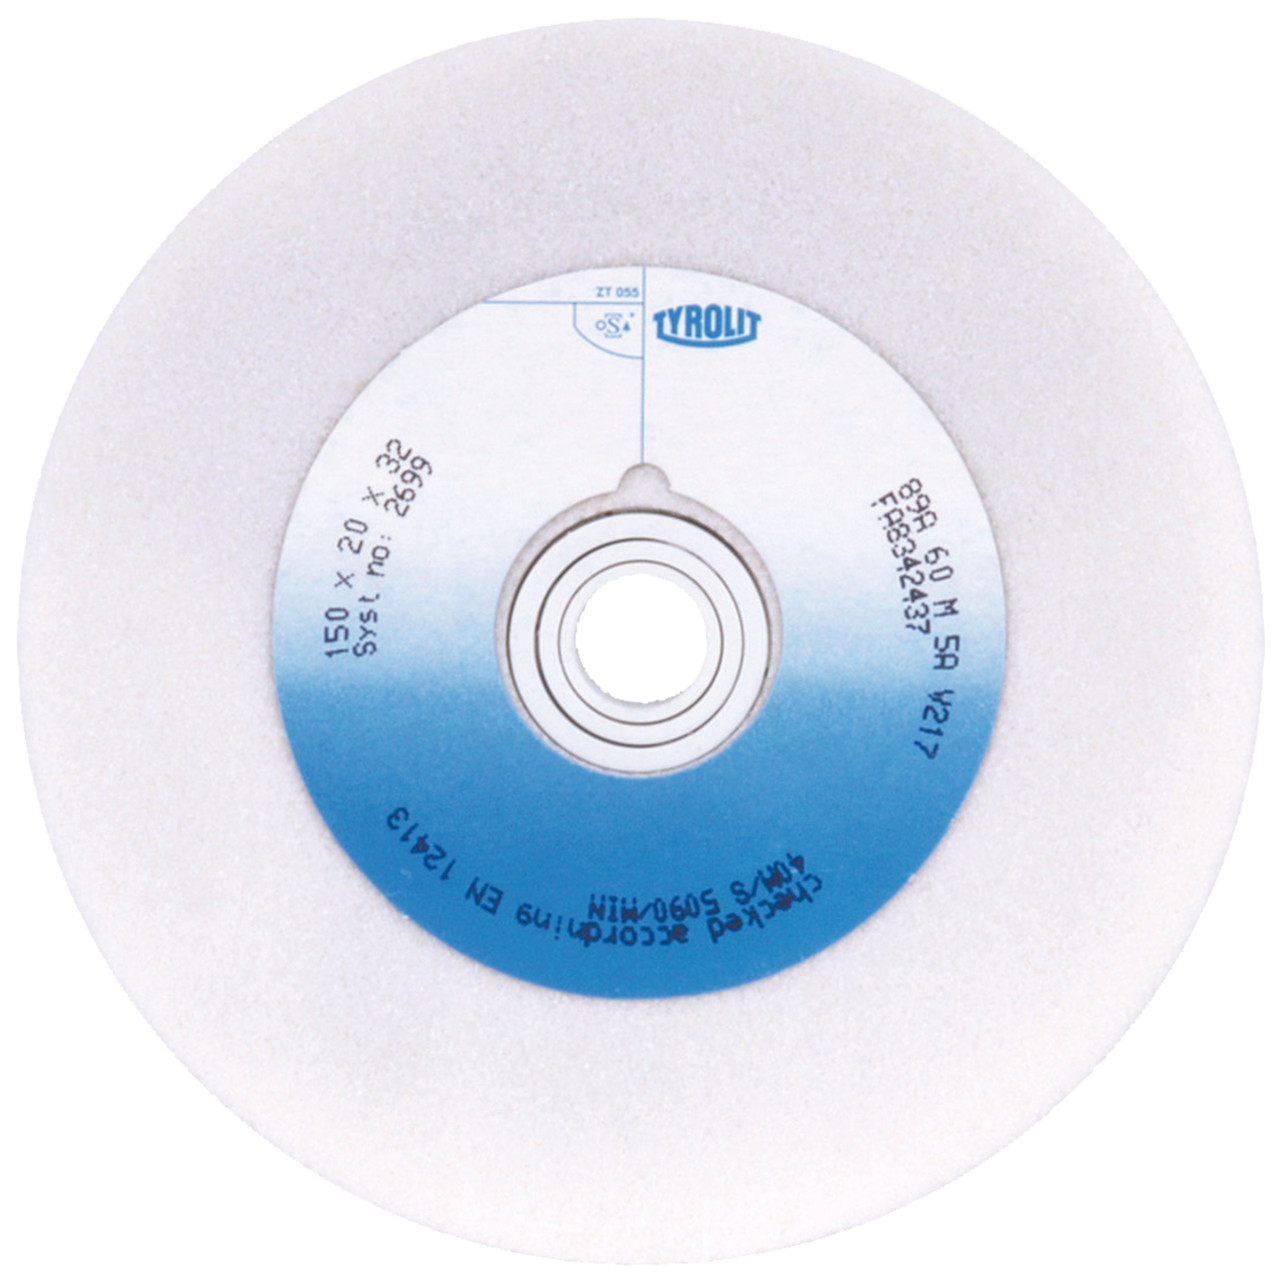 TYROLIT conventional ceramic grinding wheels DxDxH 300x40x40 For high-alloy steels and HSS, shape: 1, Art. 34046794